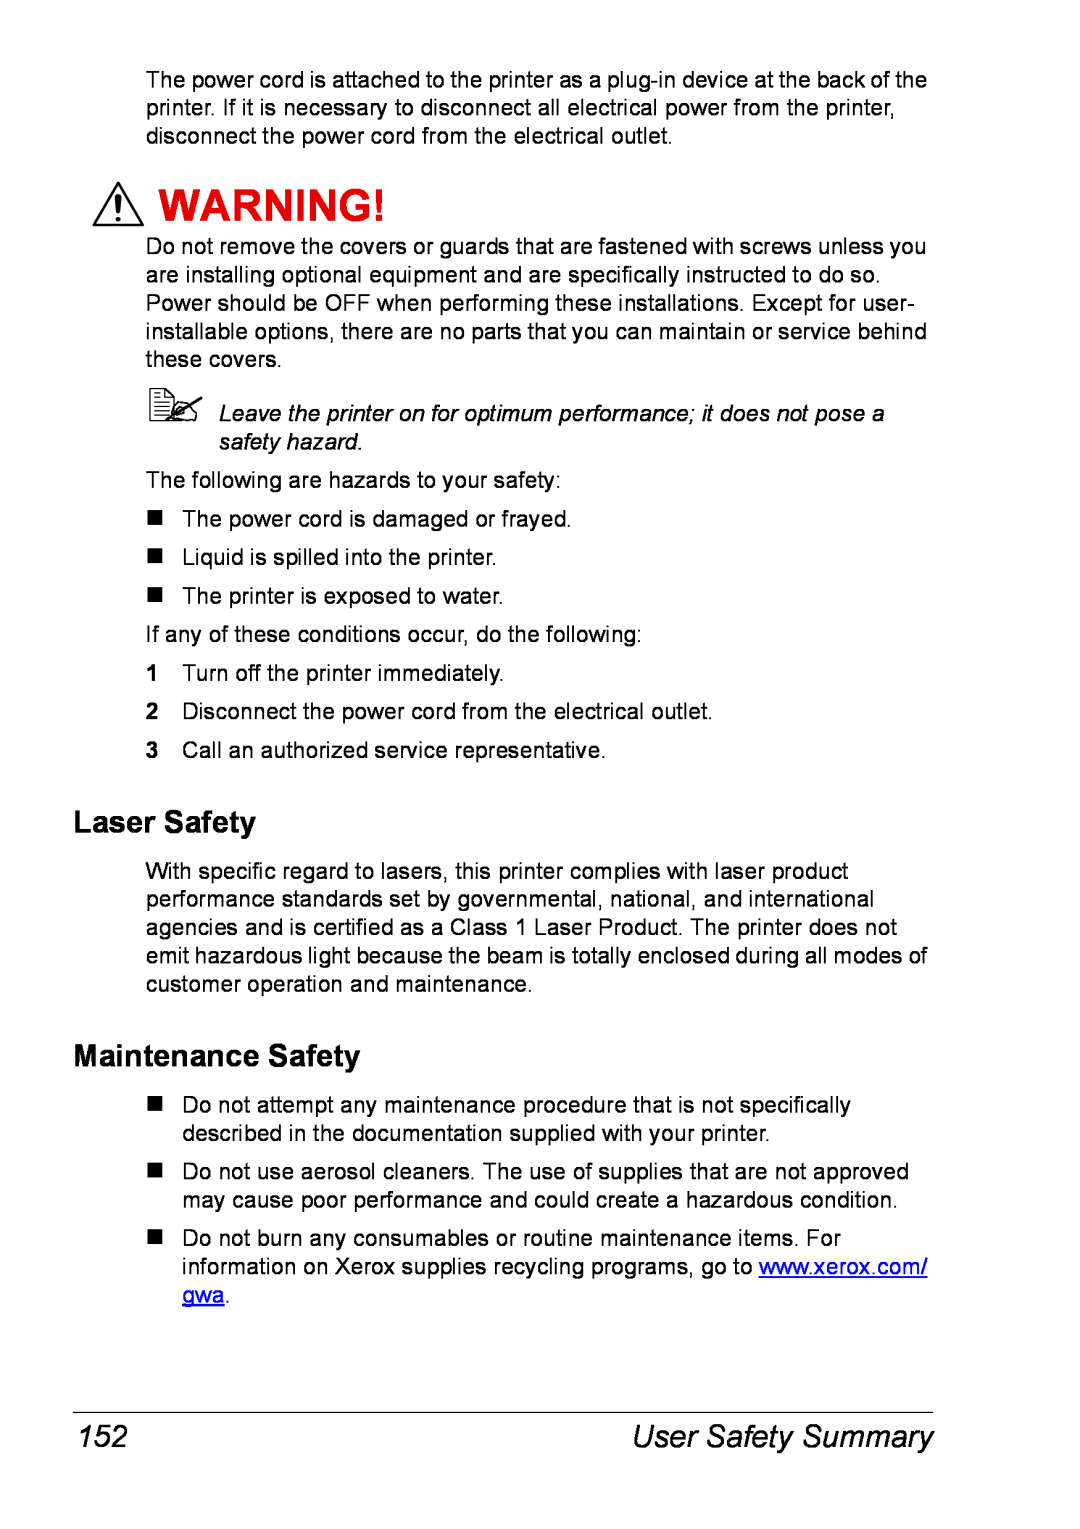 Xerox 6120 manual Laser Safety, Maintenance Safety, User Safety Summary 